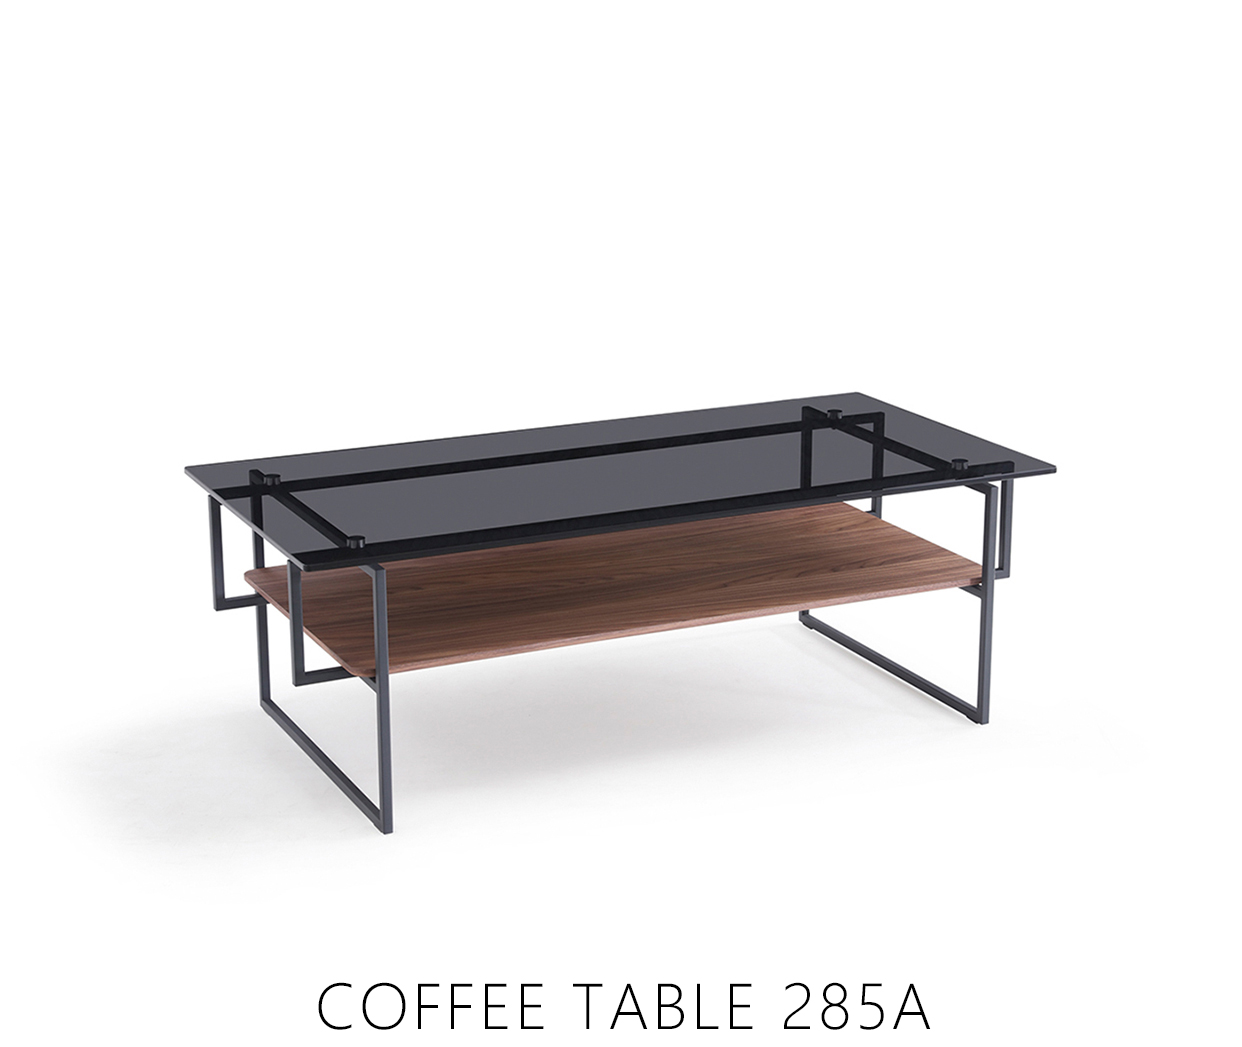 COFFEE TABLE 285A